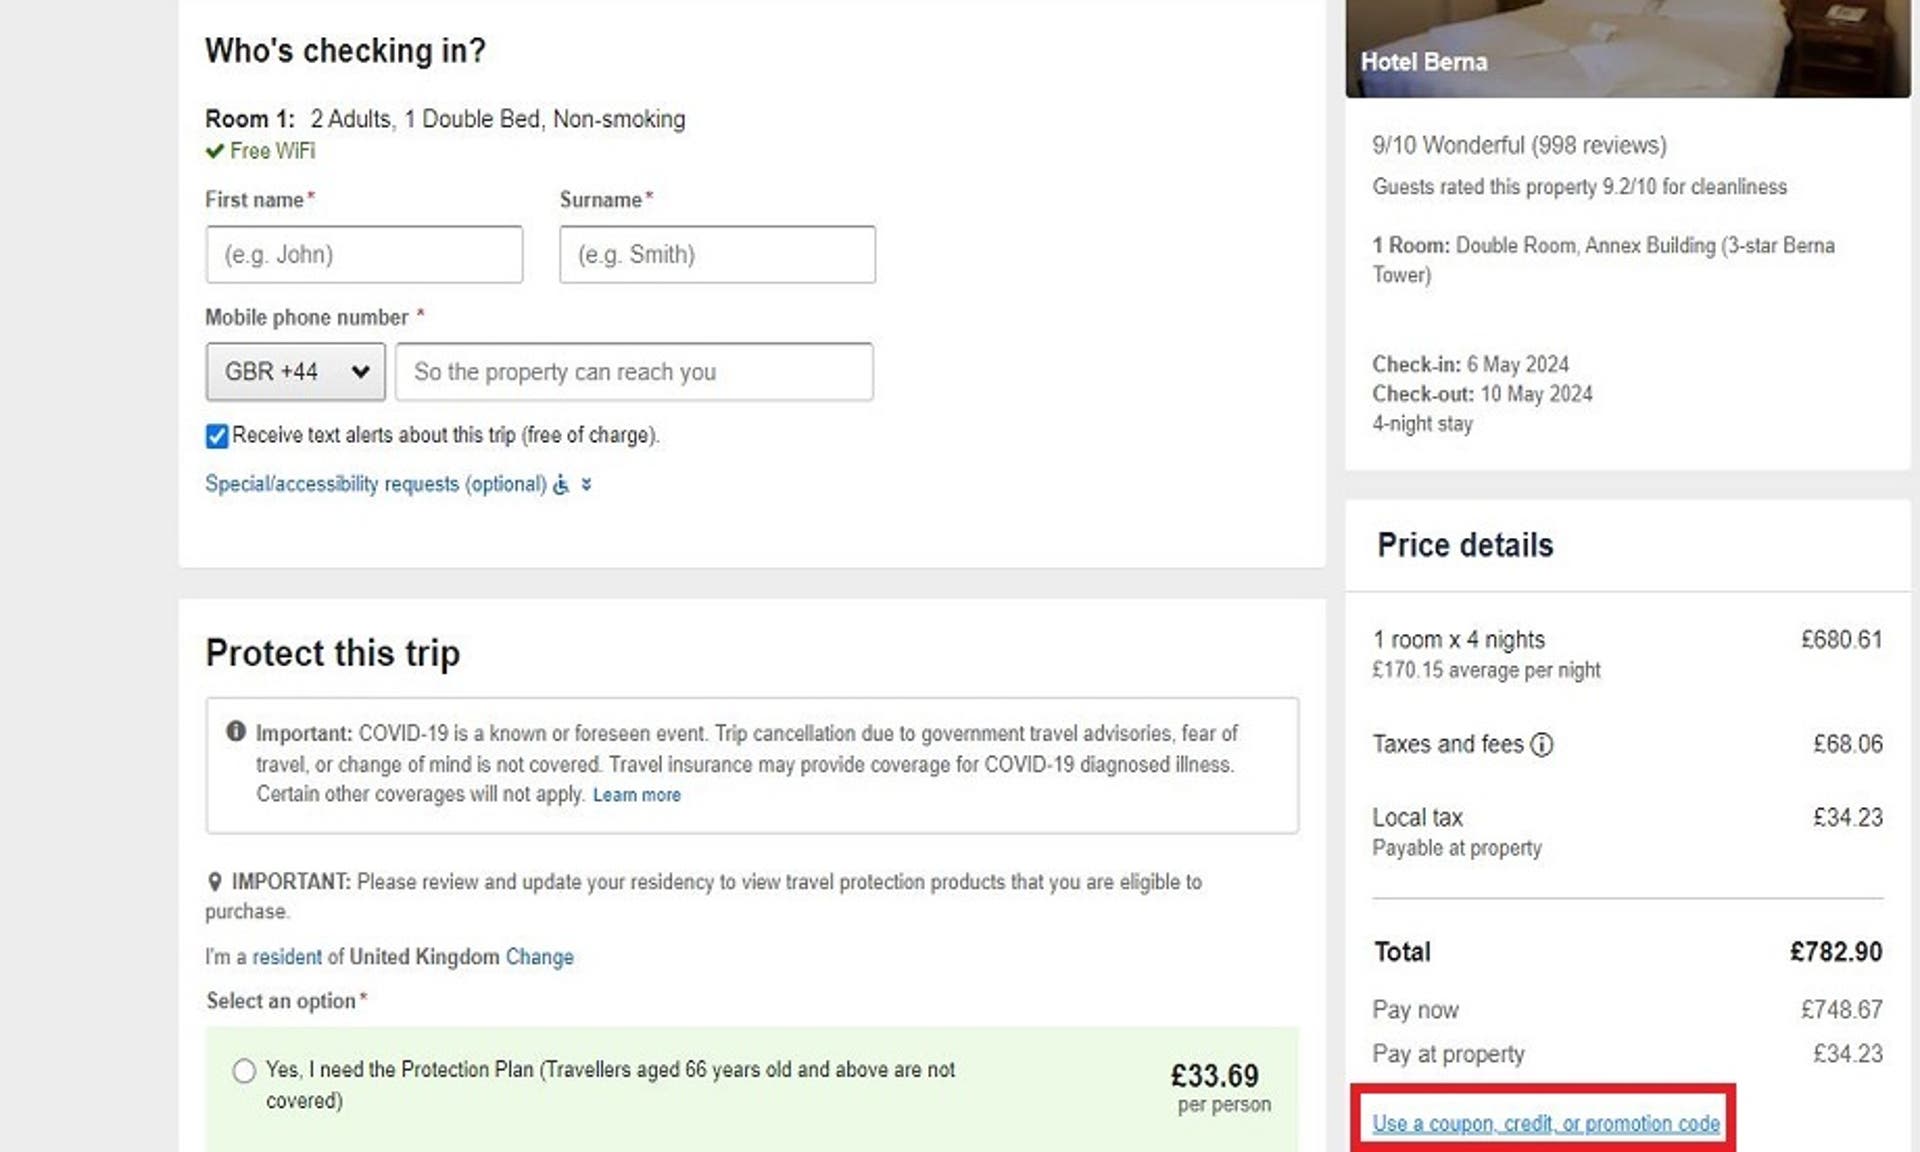  A screenshot of the Expedia website showing users how to use their discount code with the 'Use a coupon, credit or promotion code' box highlighted. 